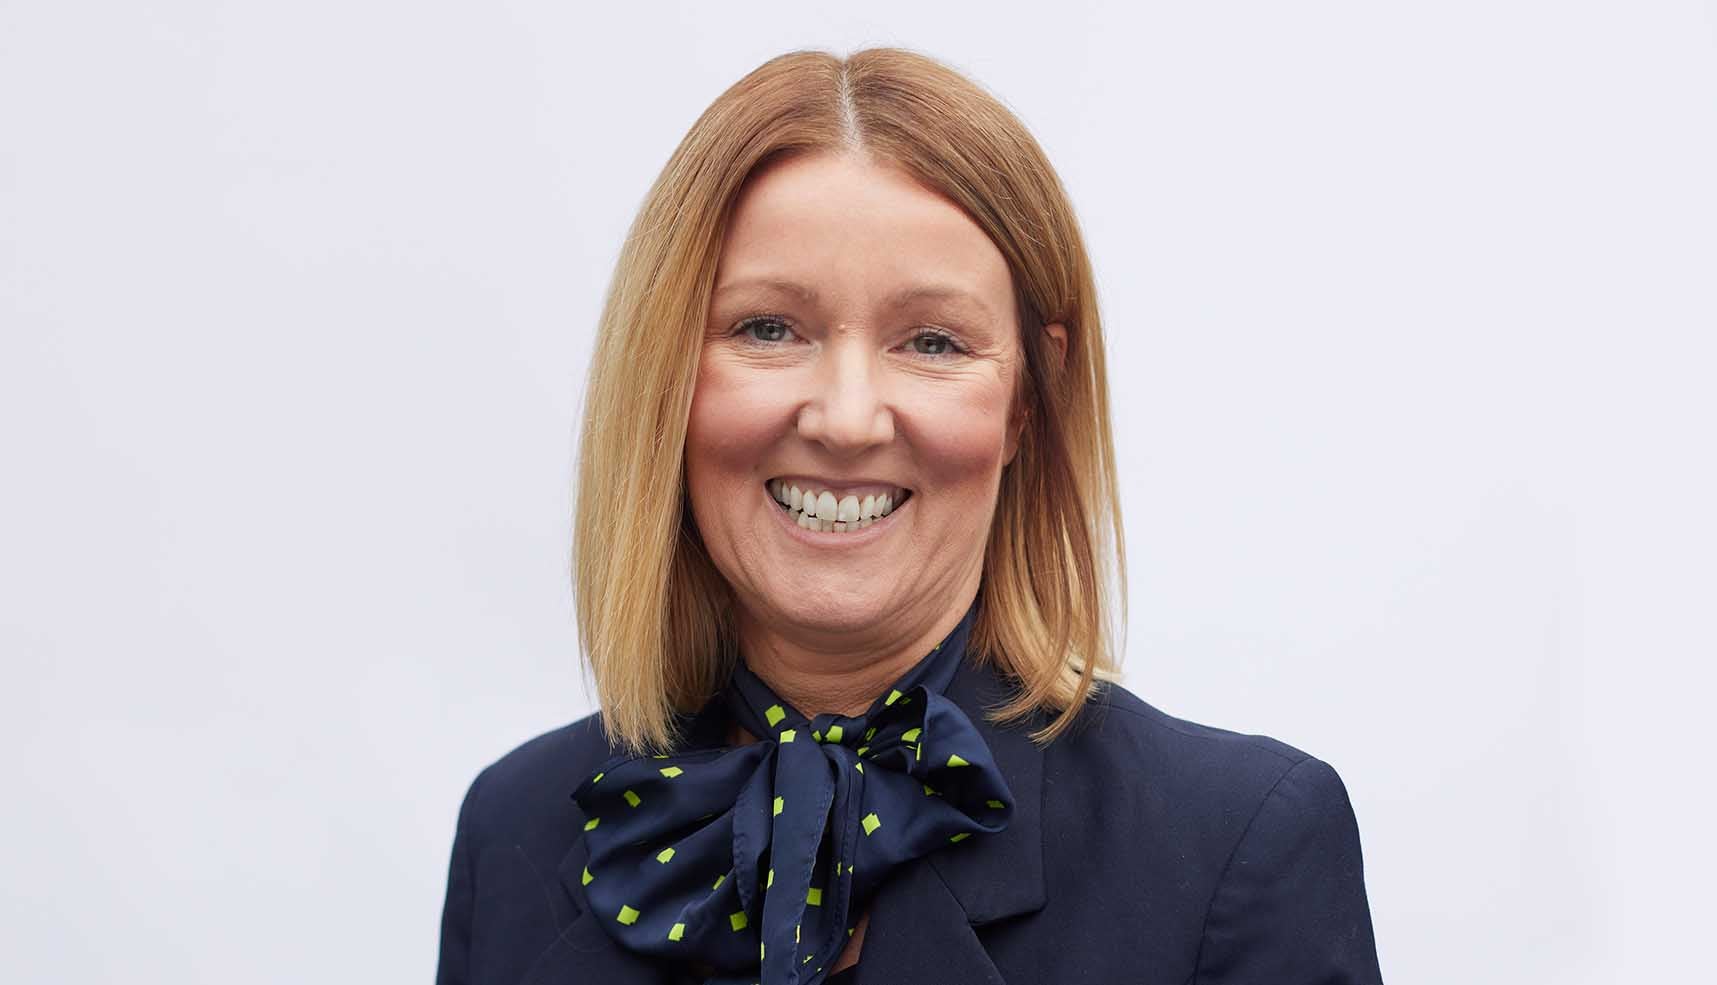 Yarm's Branch Manager, Bev. Smiling in front of a white background. 